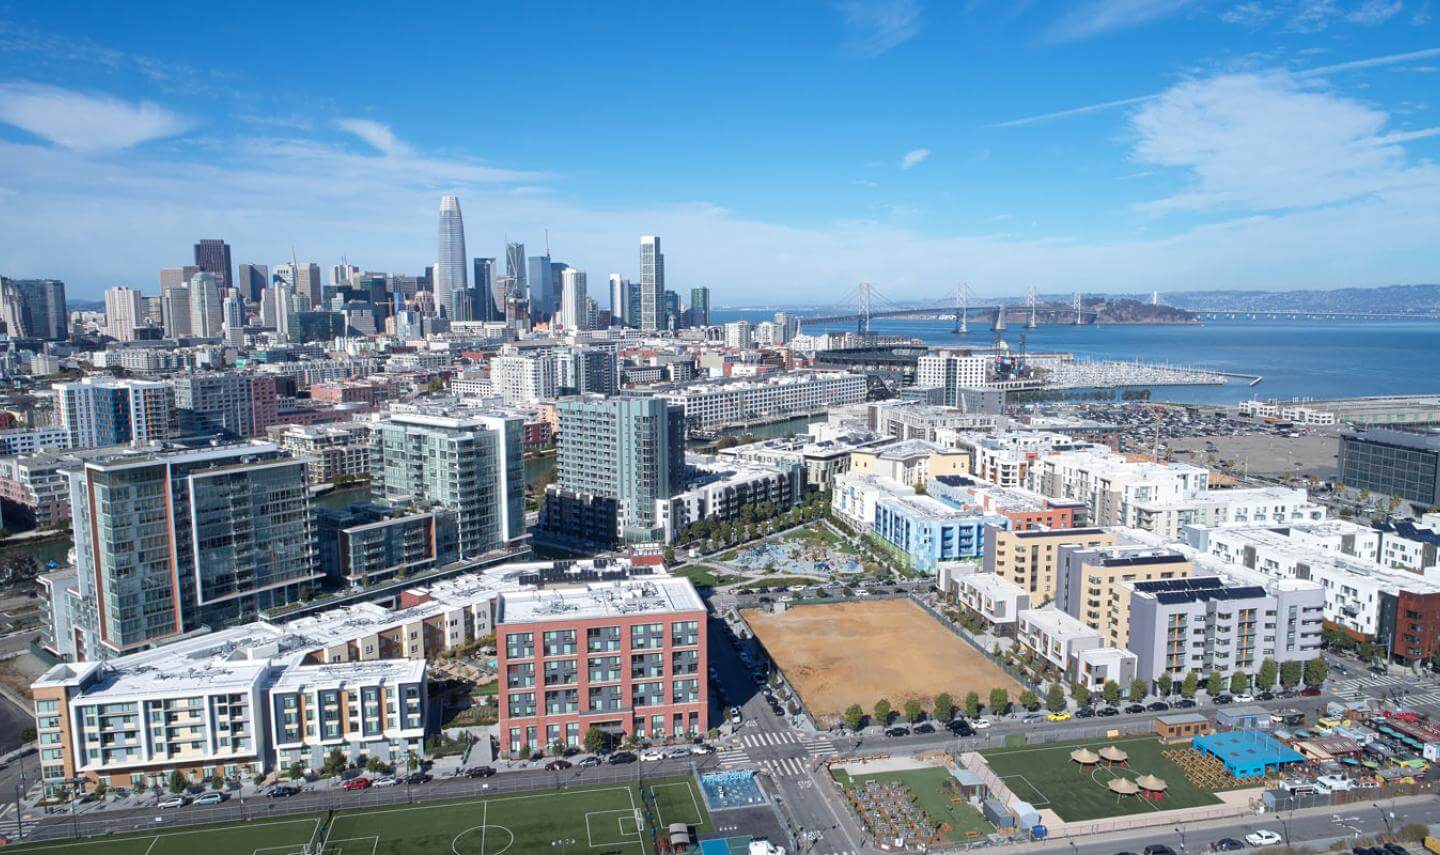 Aerial view from Mission Bay in San Francisco showing the Bay Bridge 